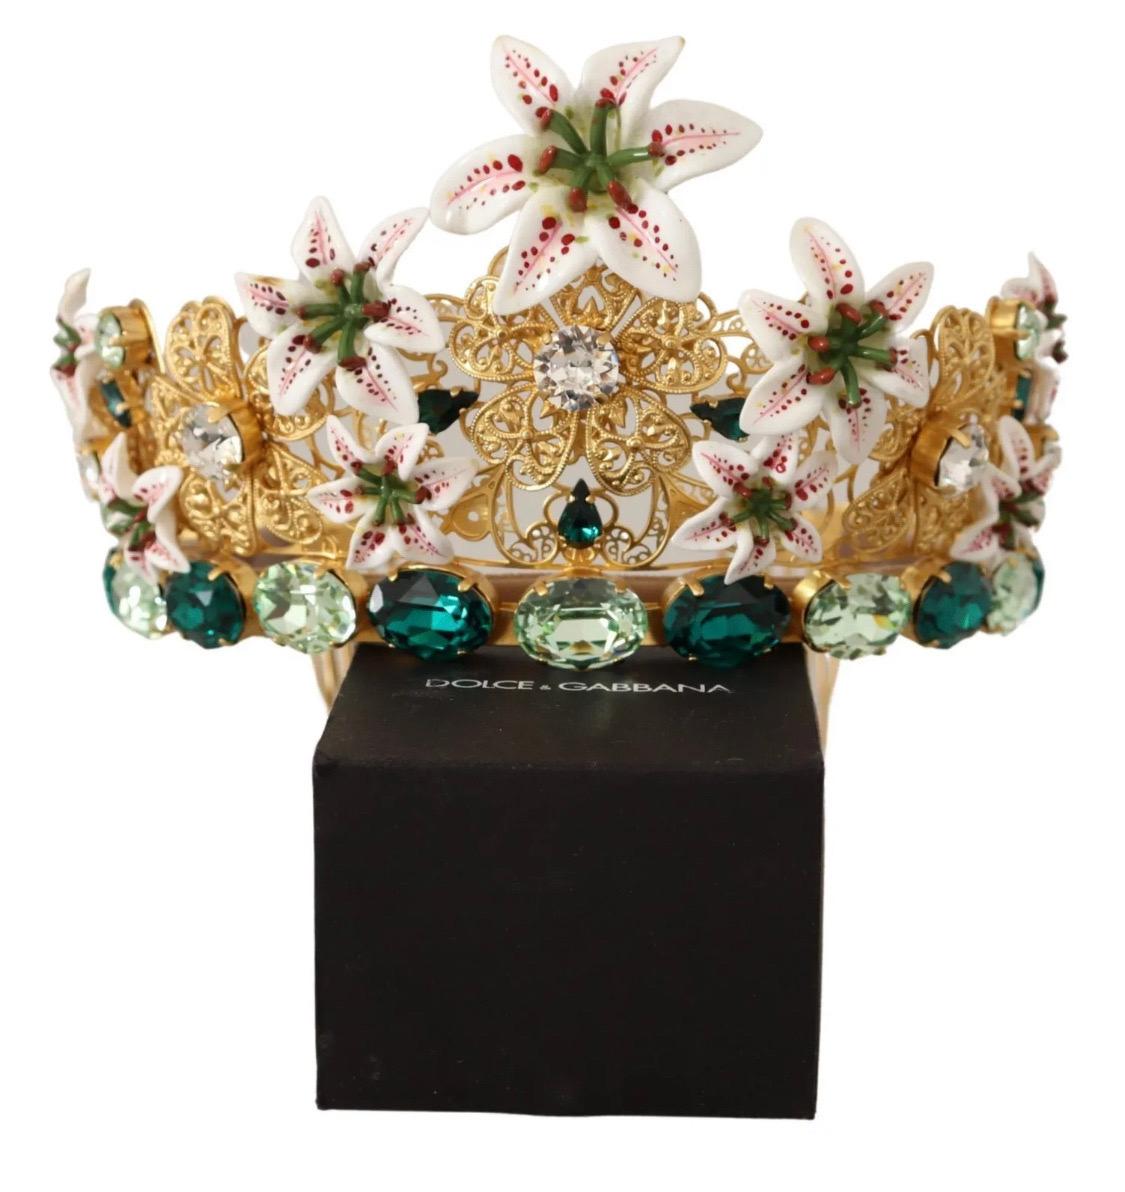 DOLCE & GABBANA

Absolutely stunning, 100% Authentic, brand new with tags Dolce & Gabbana golden tiara with an openwork pattern in the form of buds and hand-painted enamel lilies, the decor is supported by sparkling large crystals. Made from